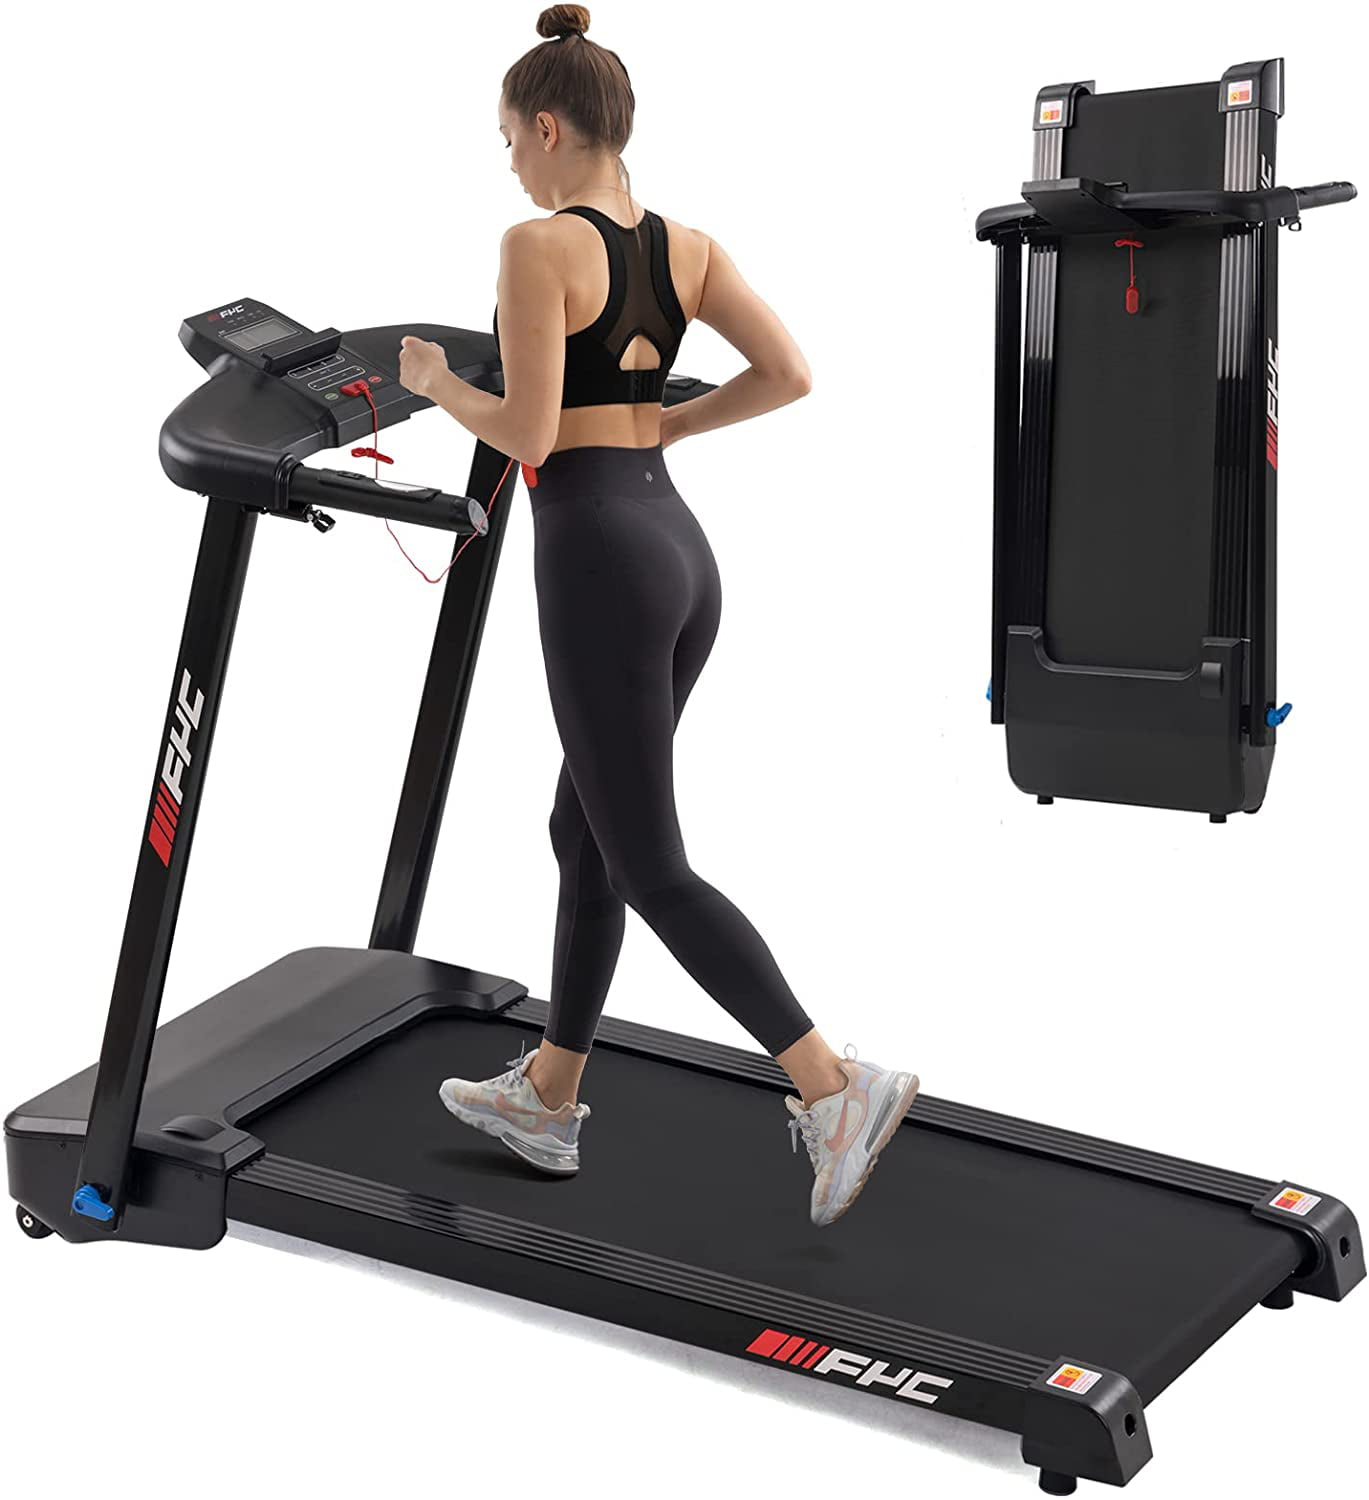 Electric Folding Treadmill,Portable Folding Treadmills for Home 285 lbs Weight Capacity,for Home/Office Gym Equipment 